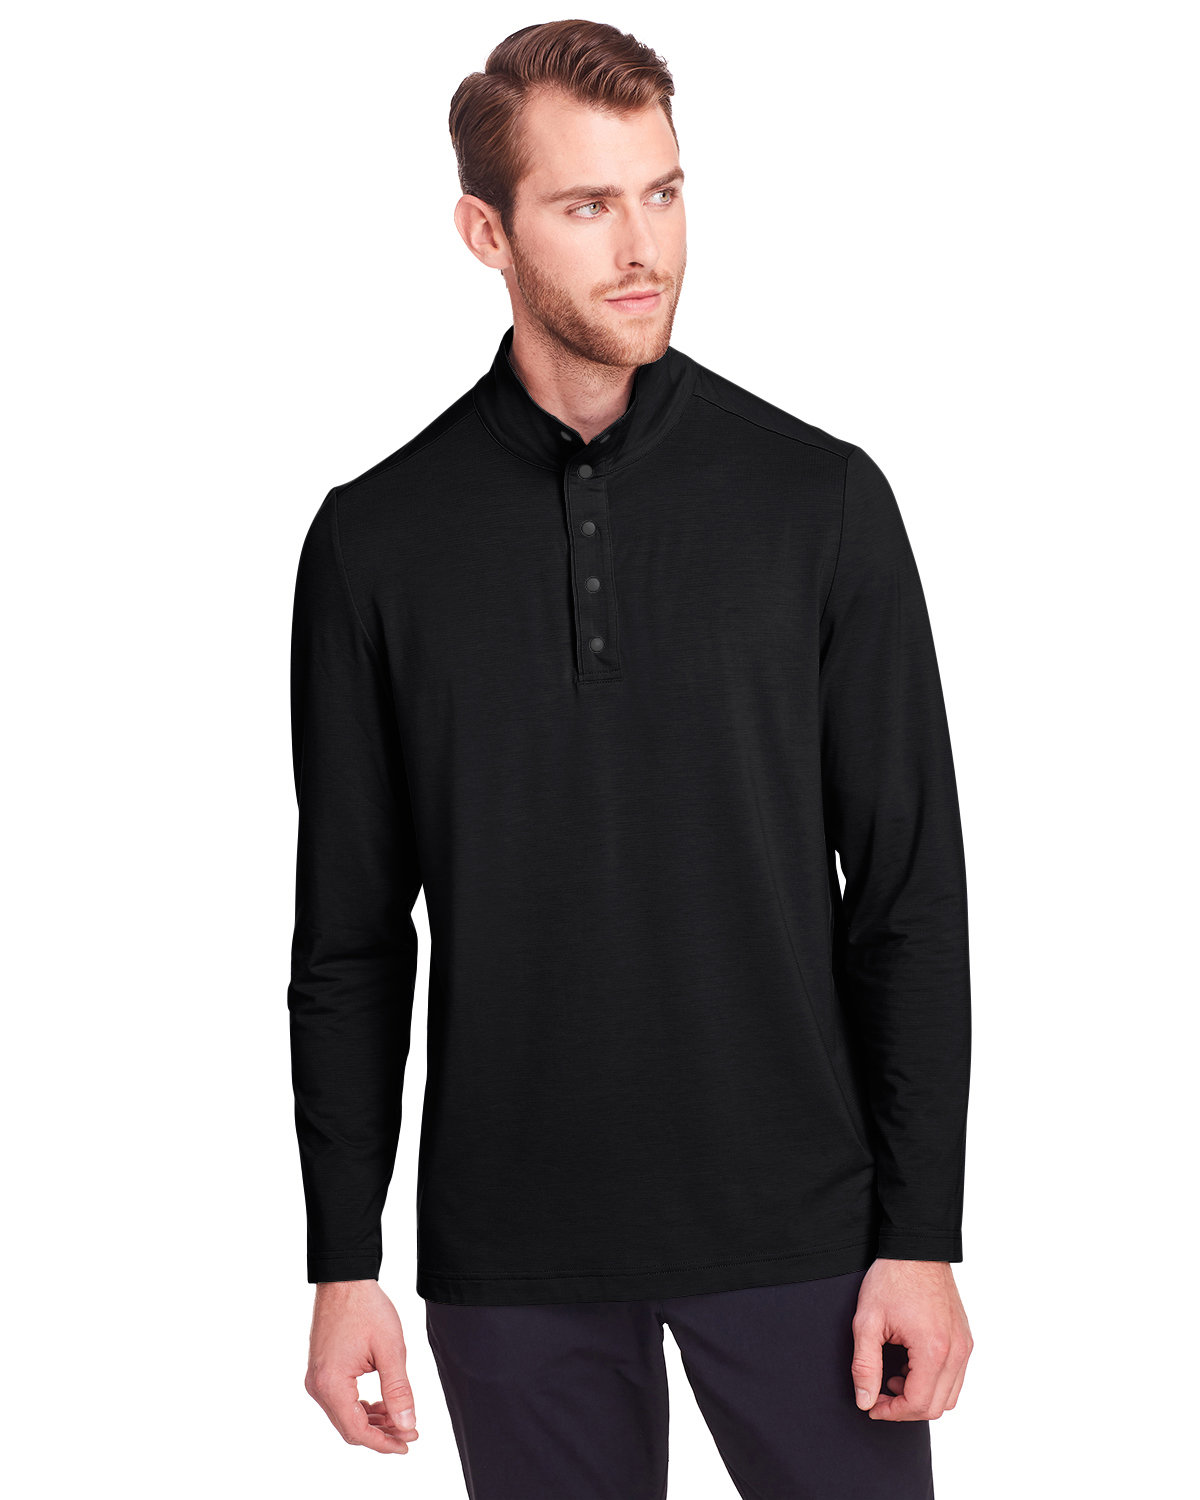 North End Men's Jaq Snap-Up Stretch Performance Pullover BLACK 